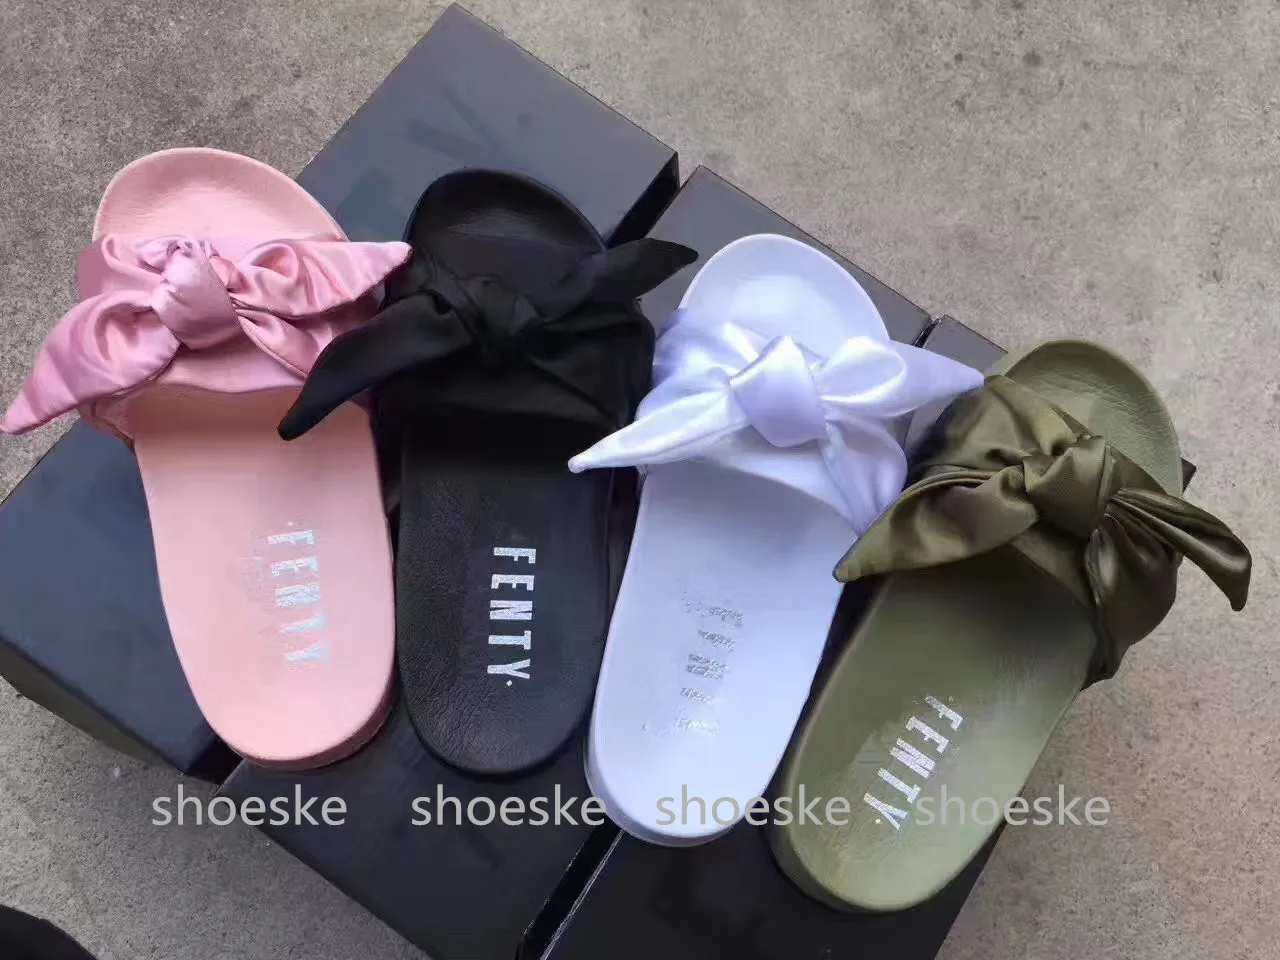 Slipper Fenty Rihanna Bow Bandana Slide Slippers Bow Slides For Women Indoor Slides With Box And Dust Bags From Shoeske, $55.28 DHgate.Com